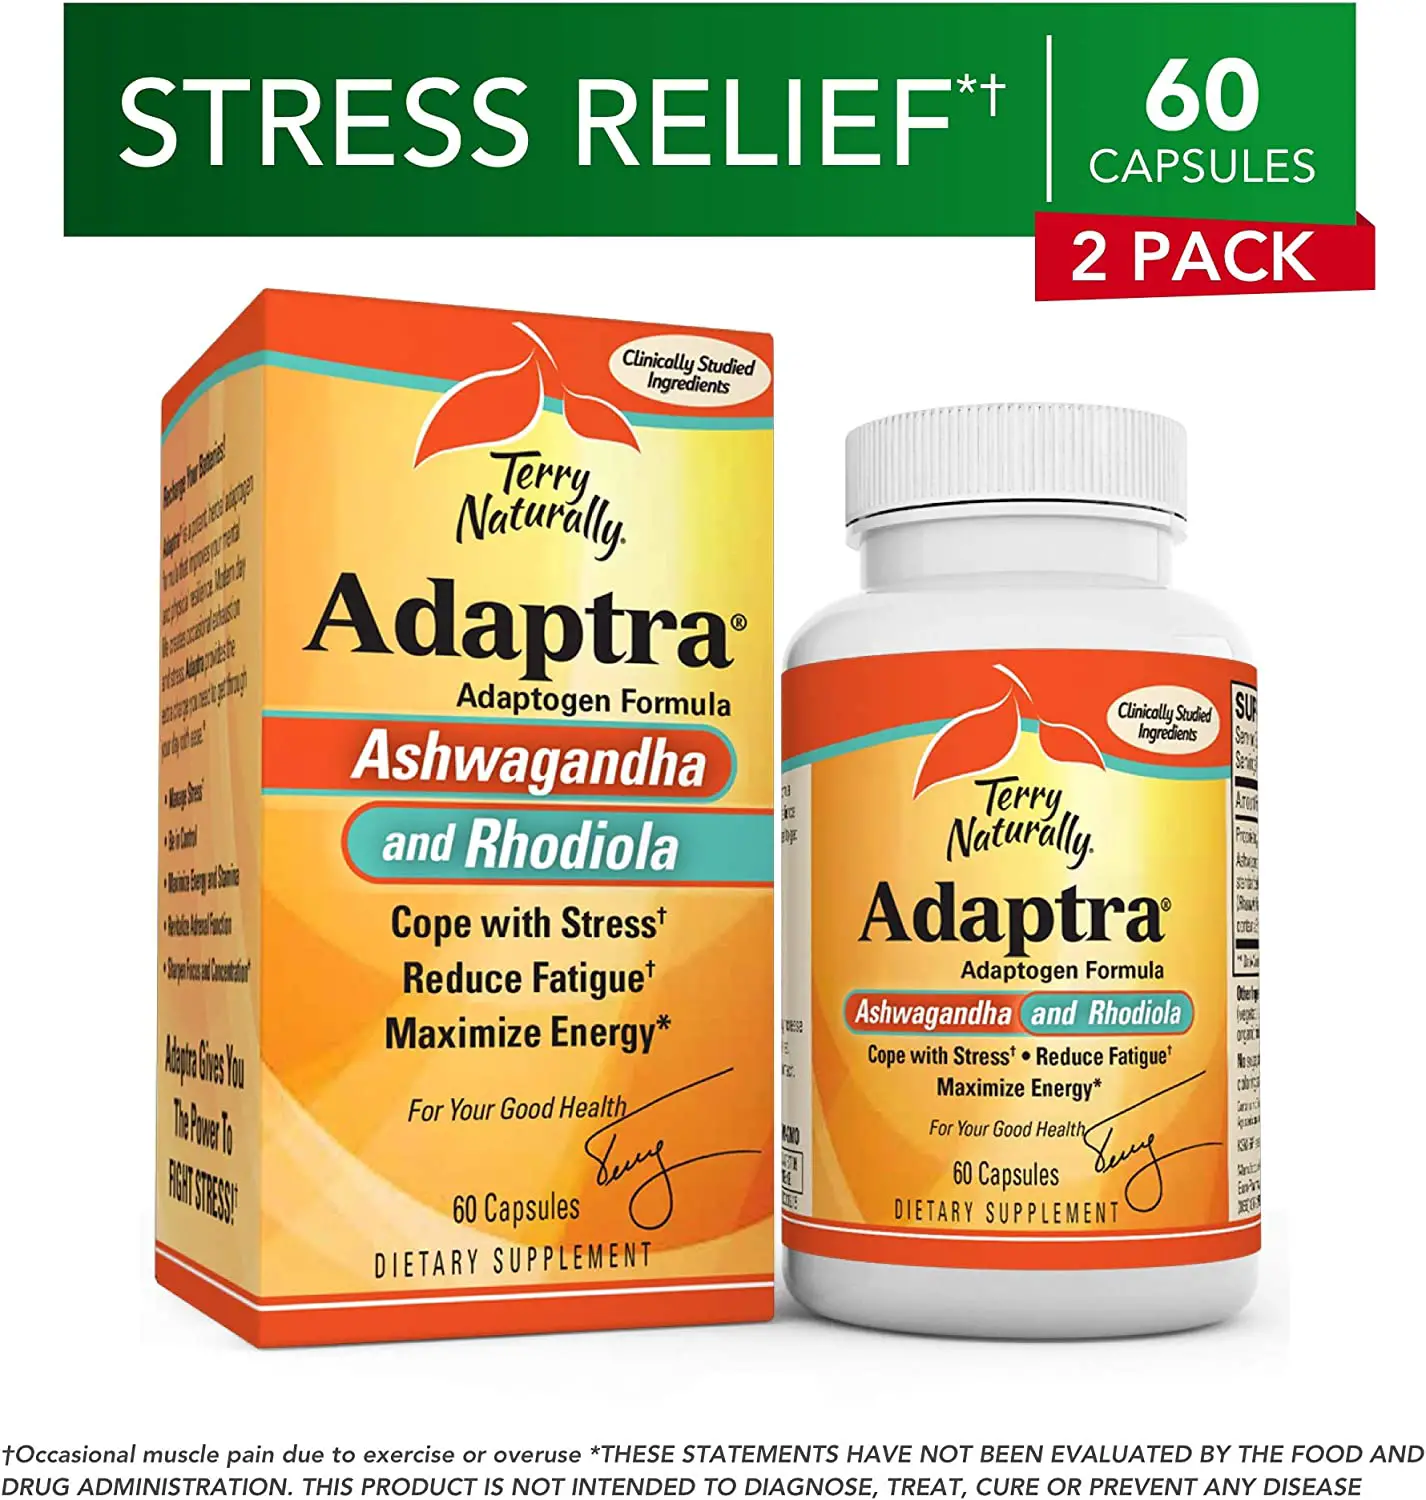 Terry Naturally Adaptra (2 Pack)